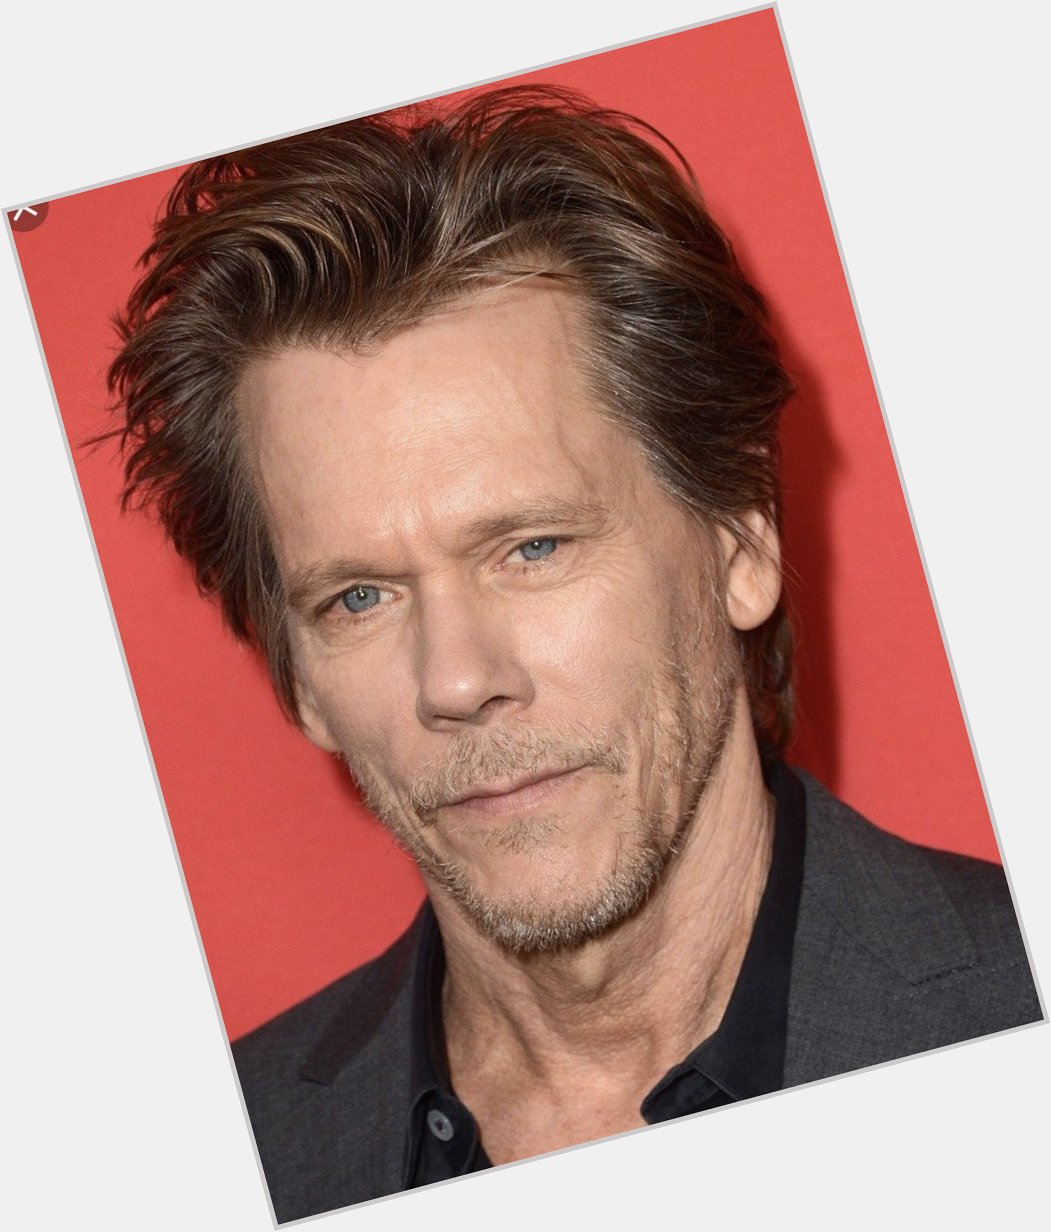 Wishing a very  Happy Birthday to the wonderful Kevin Bacon one of the most versatile Actors around 